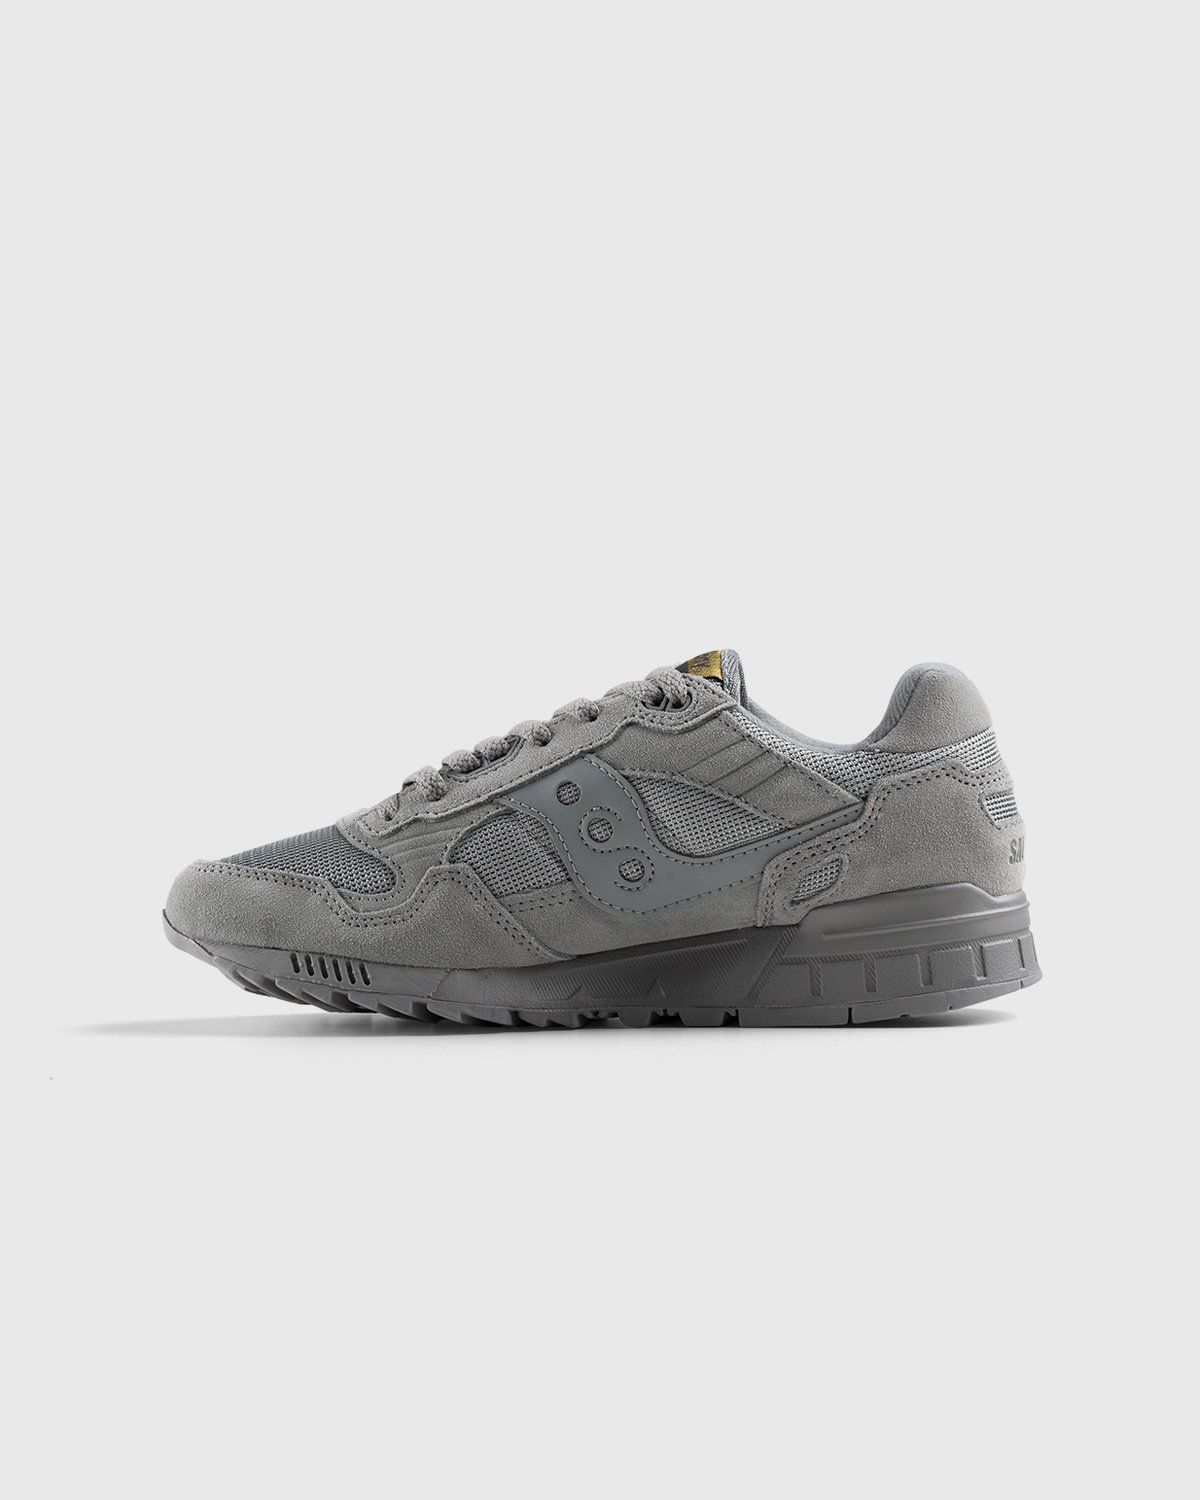 Saucony – Shadow 5000 Monument/Dove - Low Top Sneakers - Grey - Image 2